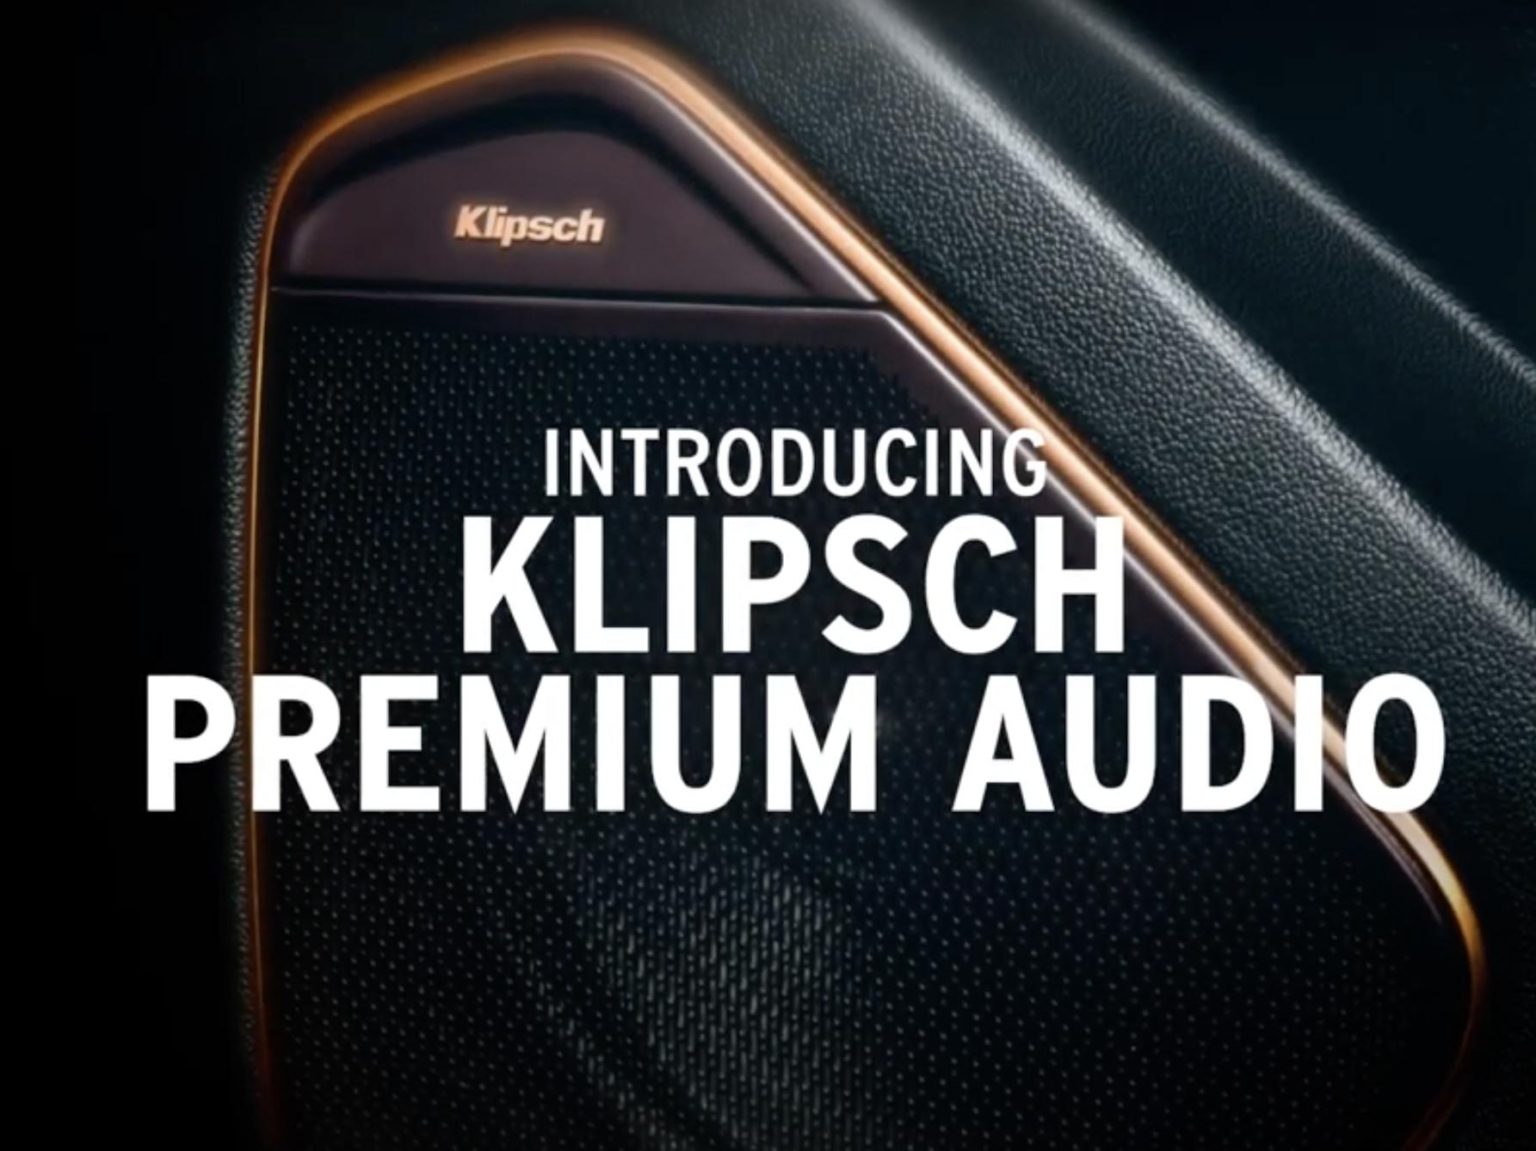 Panasonic, Klipsch, and Dolby have teamed up to create a new audio system, Klipsch Premium Audio.